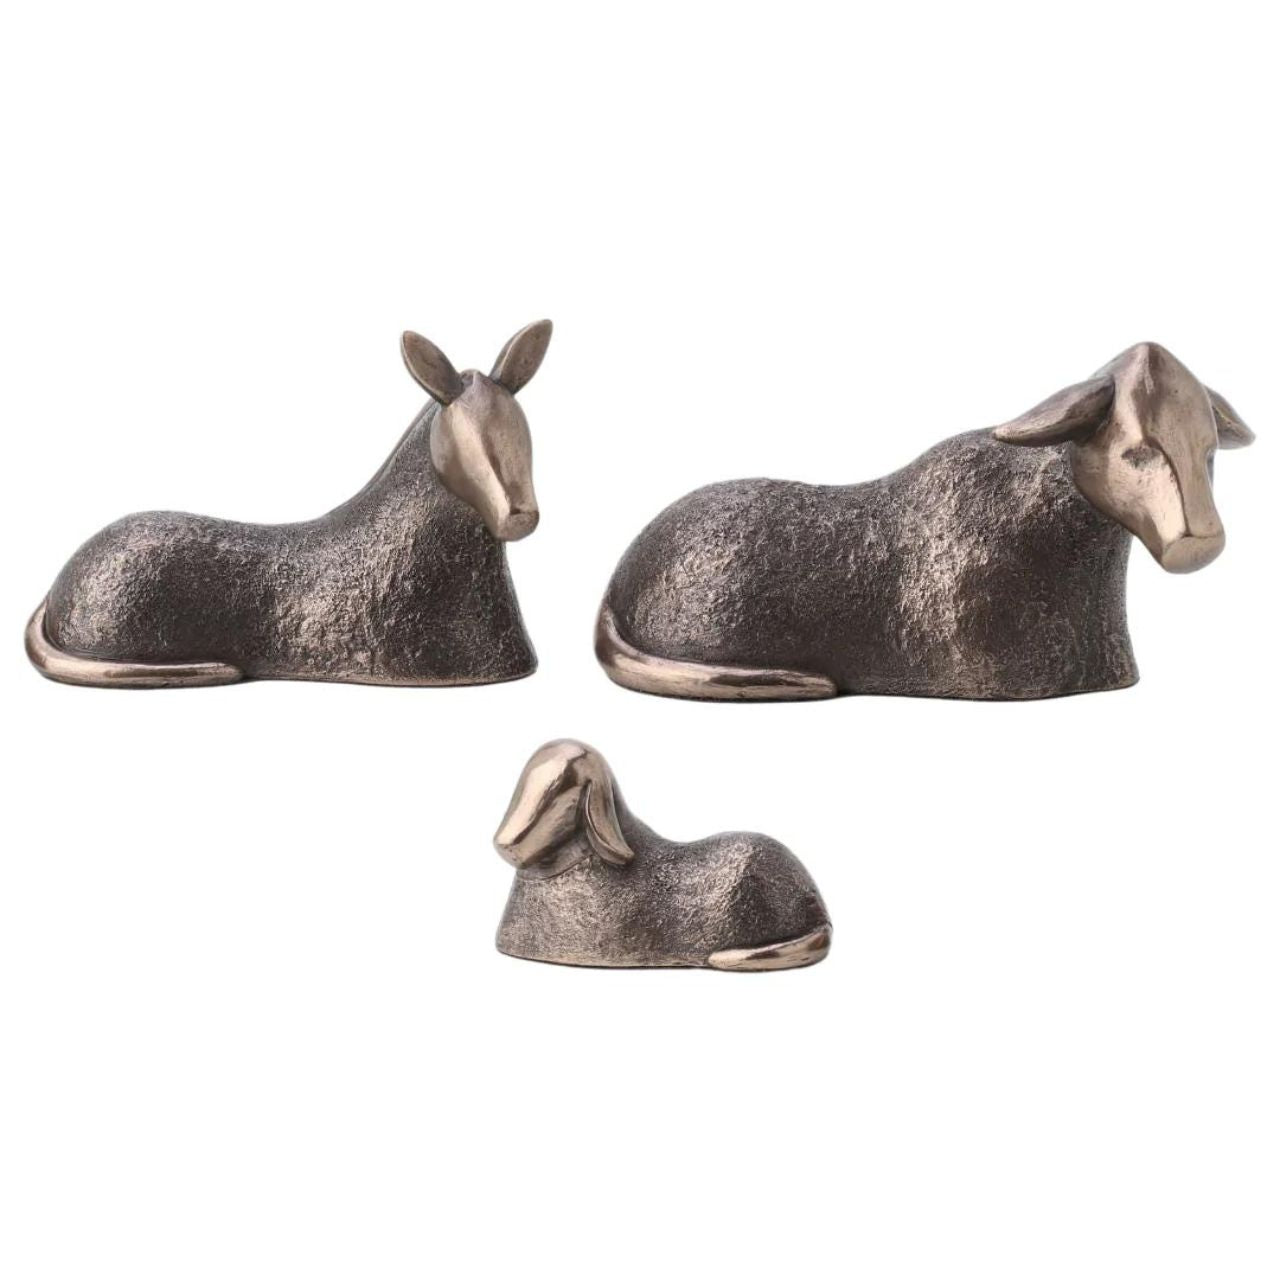 Genesis Nativity Animals.  A beautiful collection of three bronze coloured nativity animals from Genesis Ireland.  The perfect addition to your nativity scenes this Christmas.